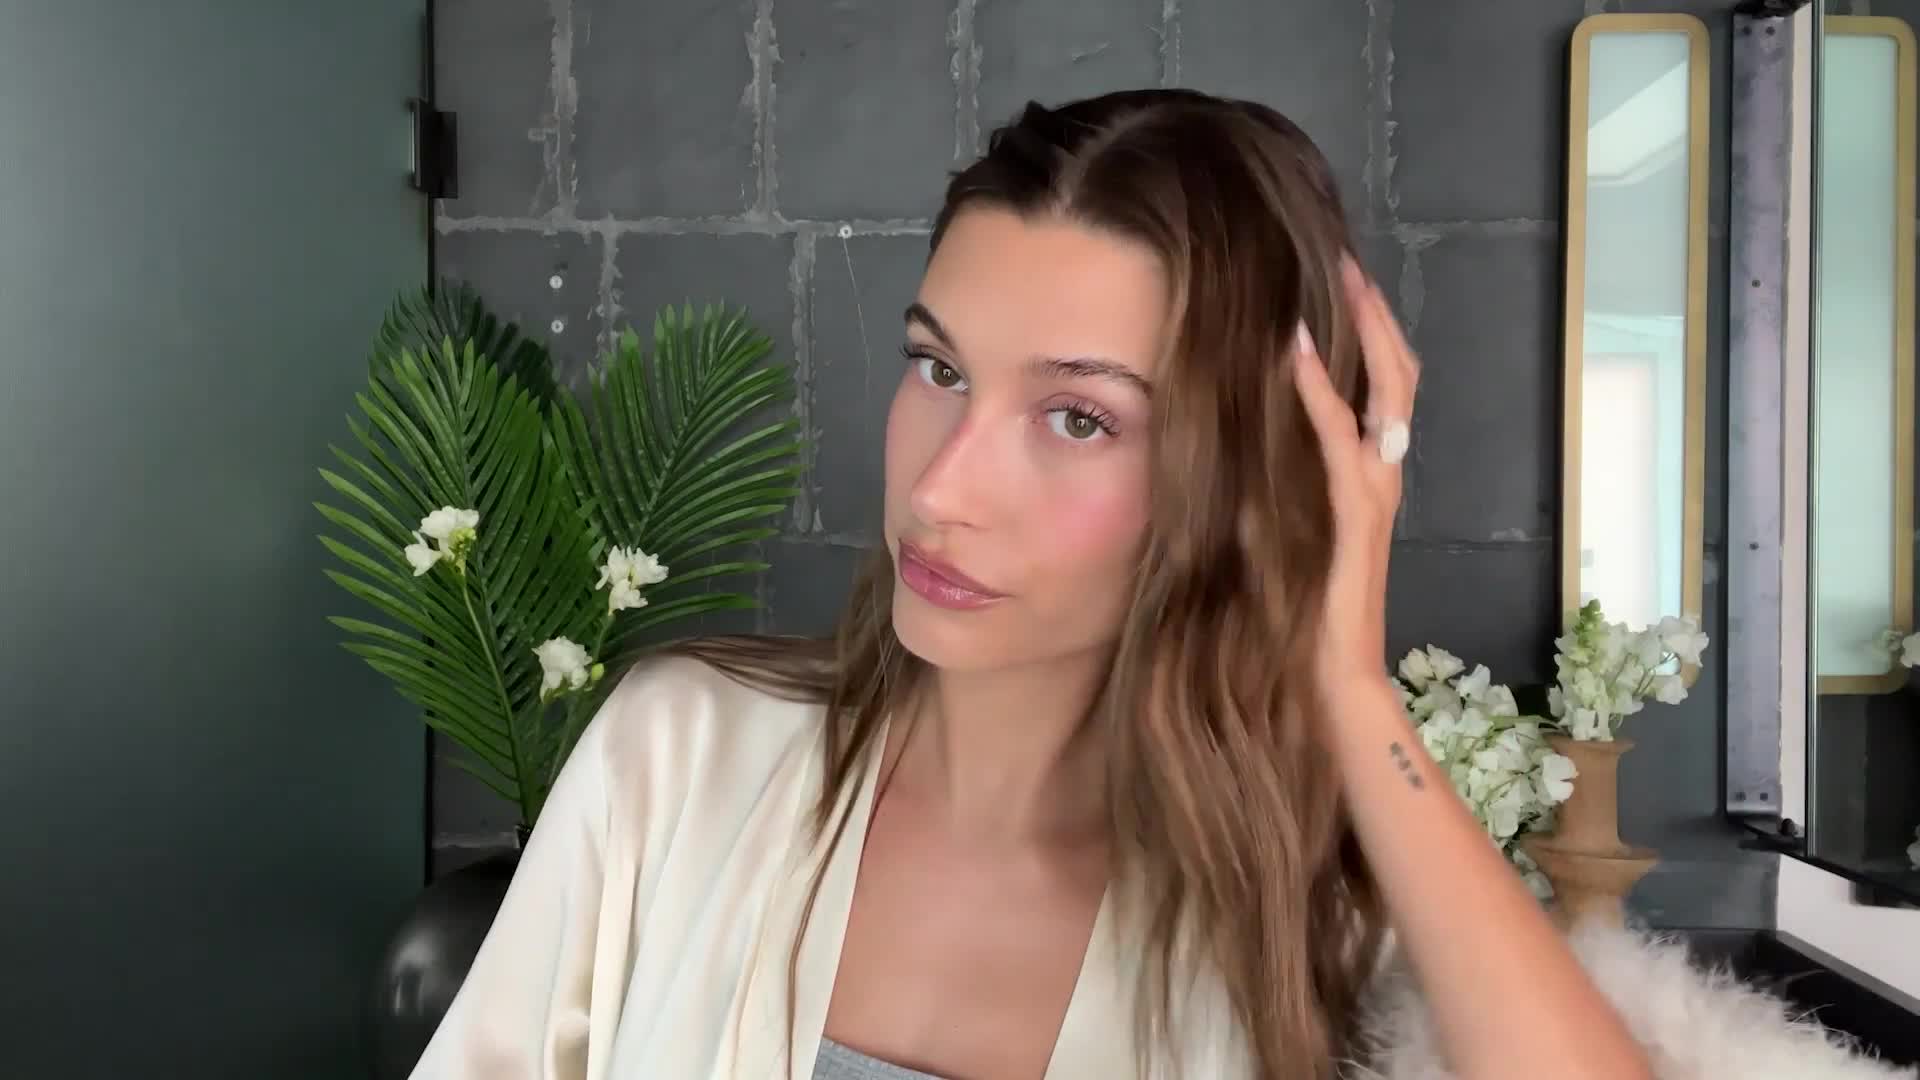 Watch Hailey Bieber on Dewy Skin Care, Date-Night Makeup, and the